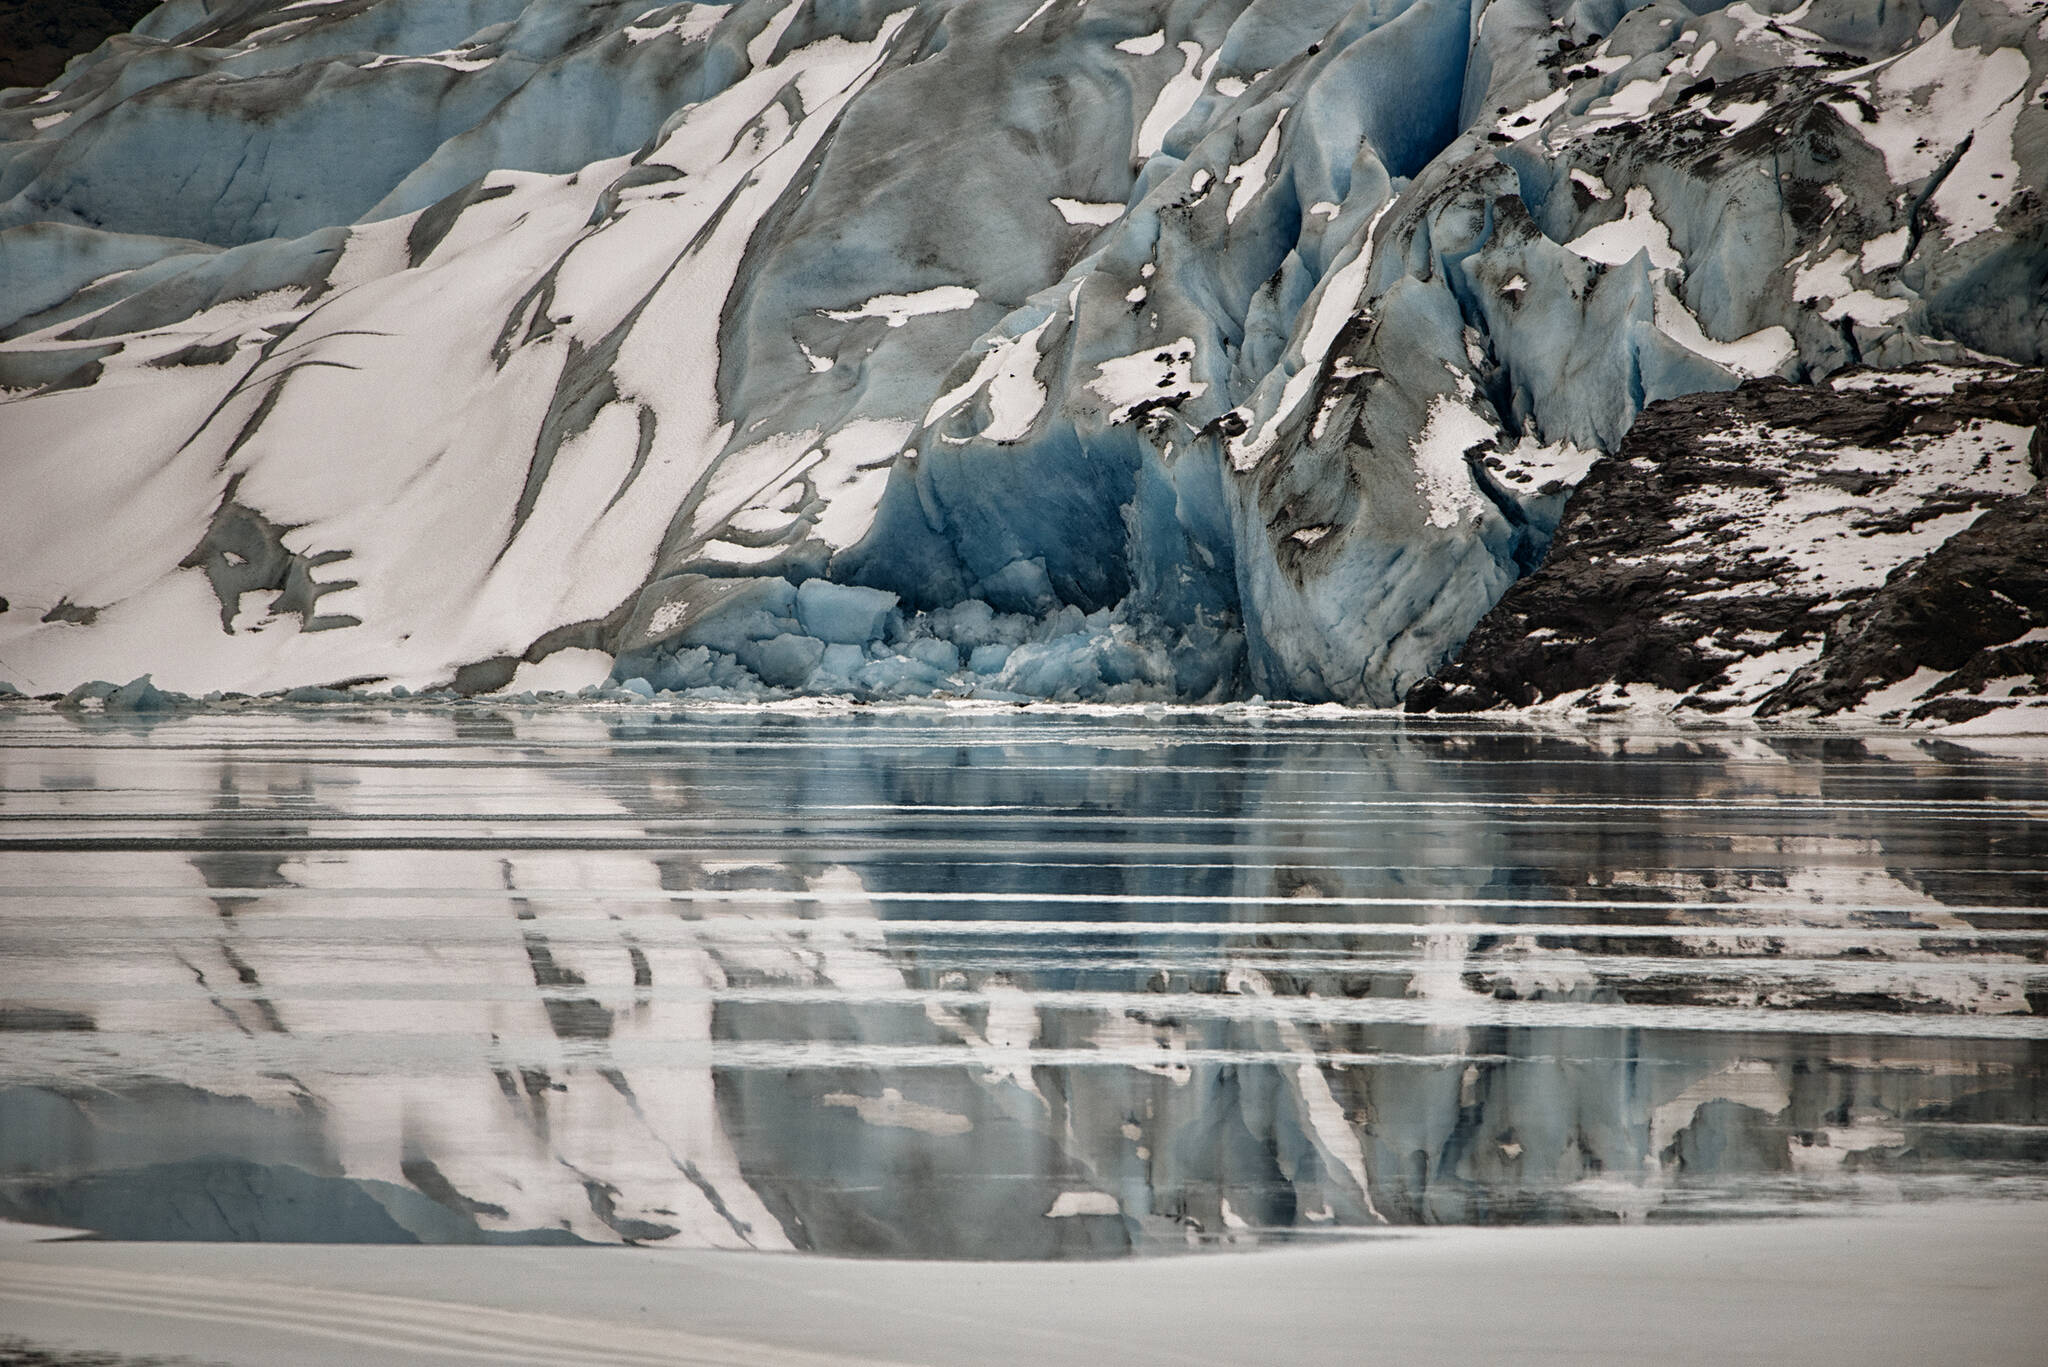 The Mendenhall Glacier with freshly calved blue ice touching fresh water. (Courtesy Photo / Kenneth Gill, gillfoto)